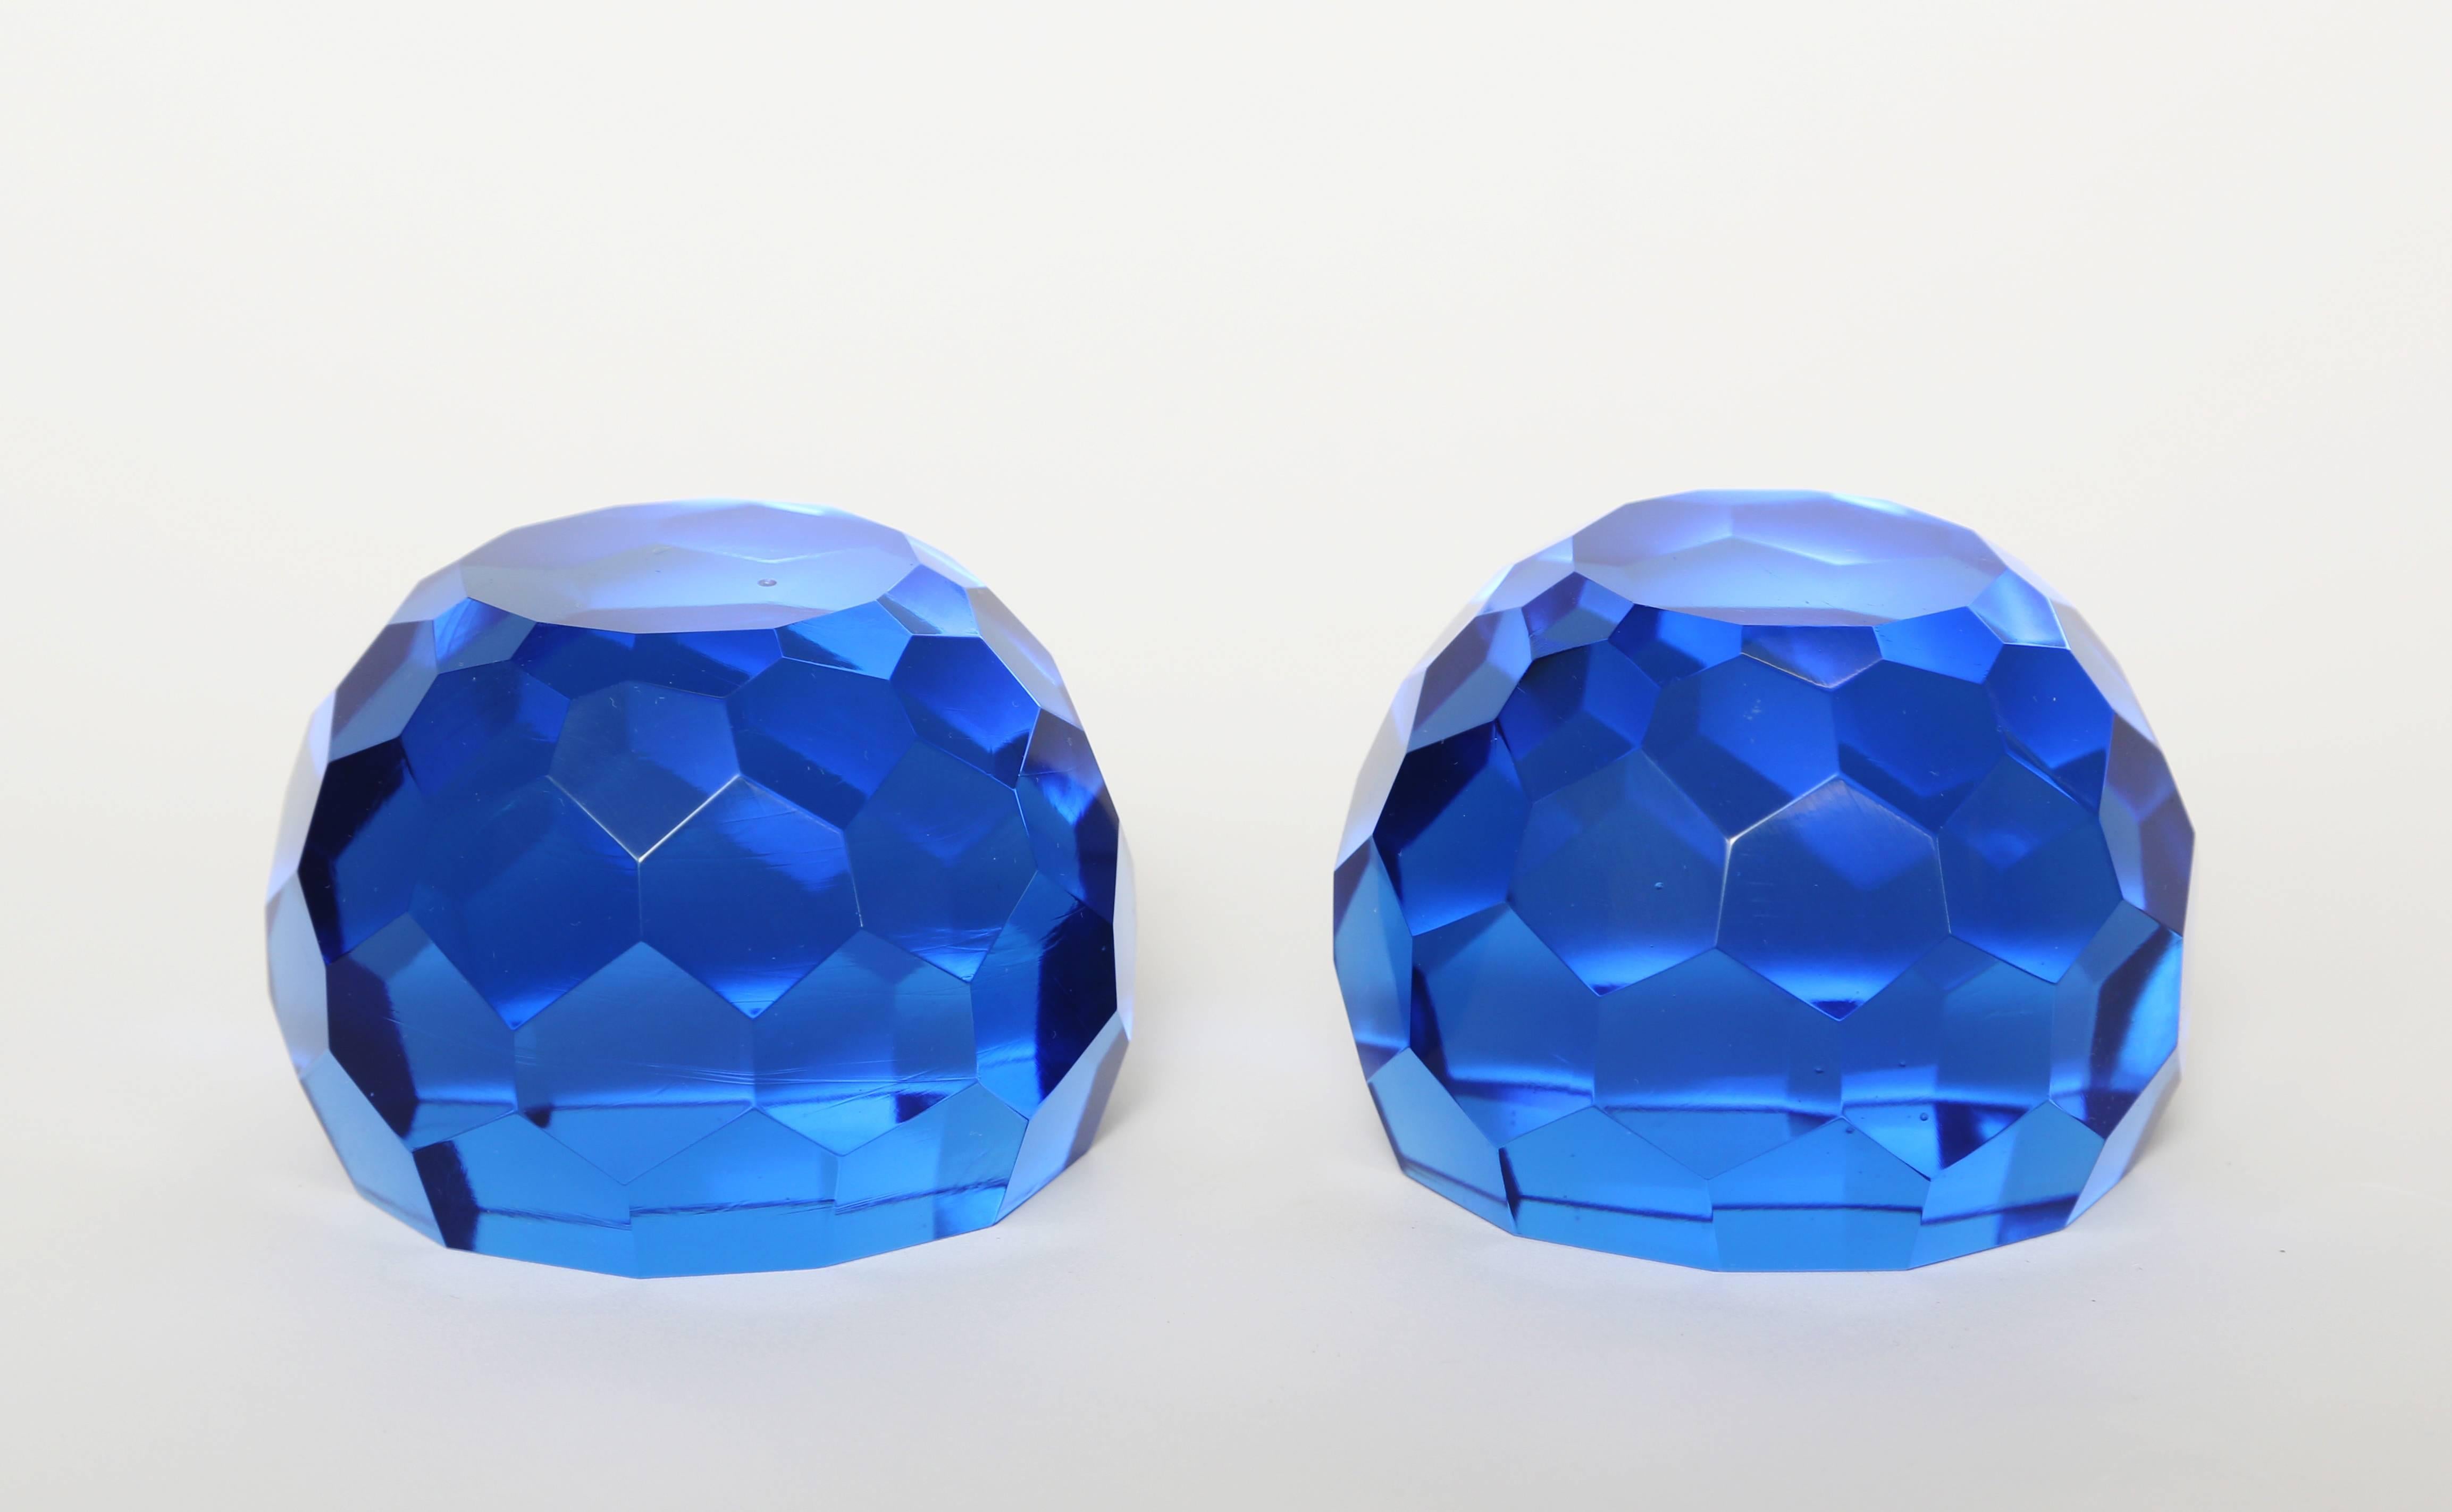 Unusual to find a pair of matched paperweights, probably made for a partner's desk. This pair of blown, handcut and multifaceted cobalt blue paperweights remain in excellent condition.

(This item is eligible for a complimentary gift box upon